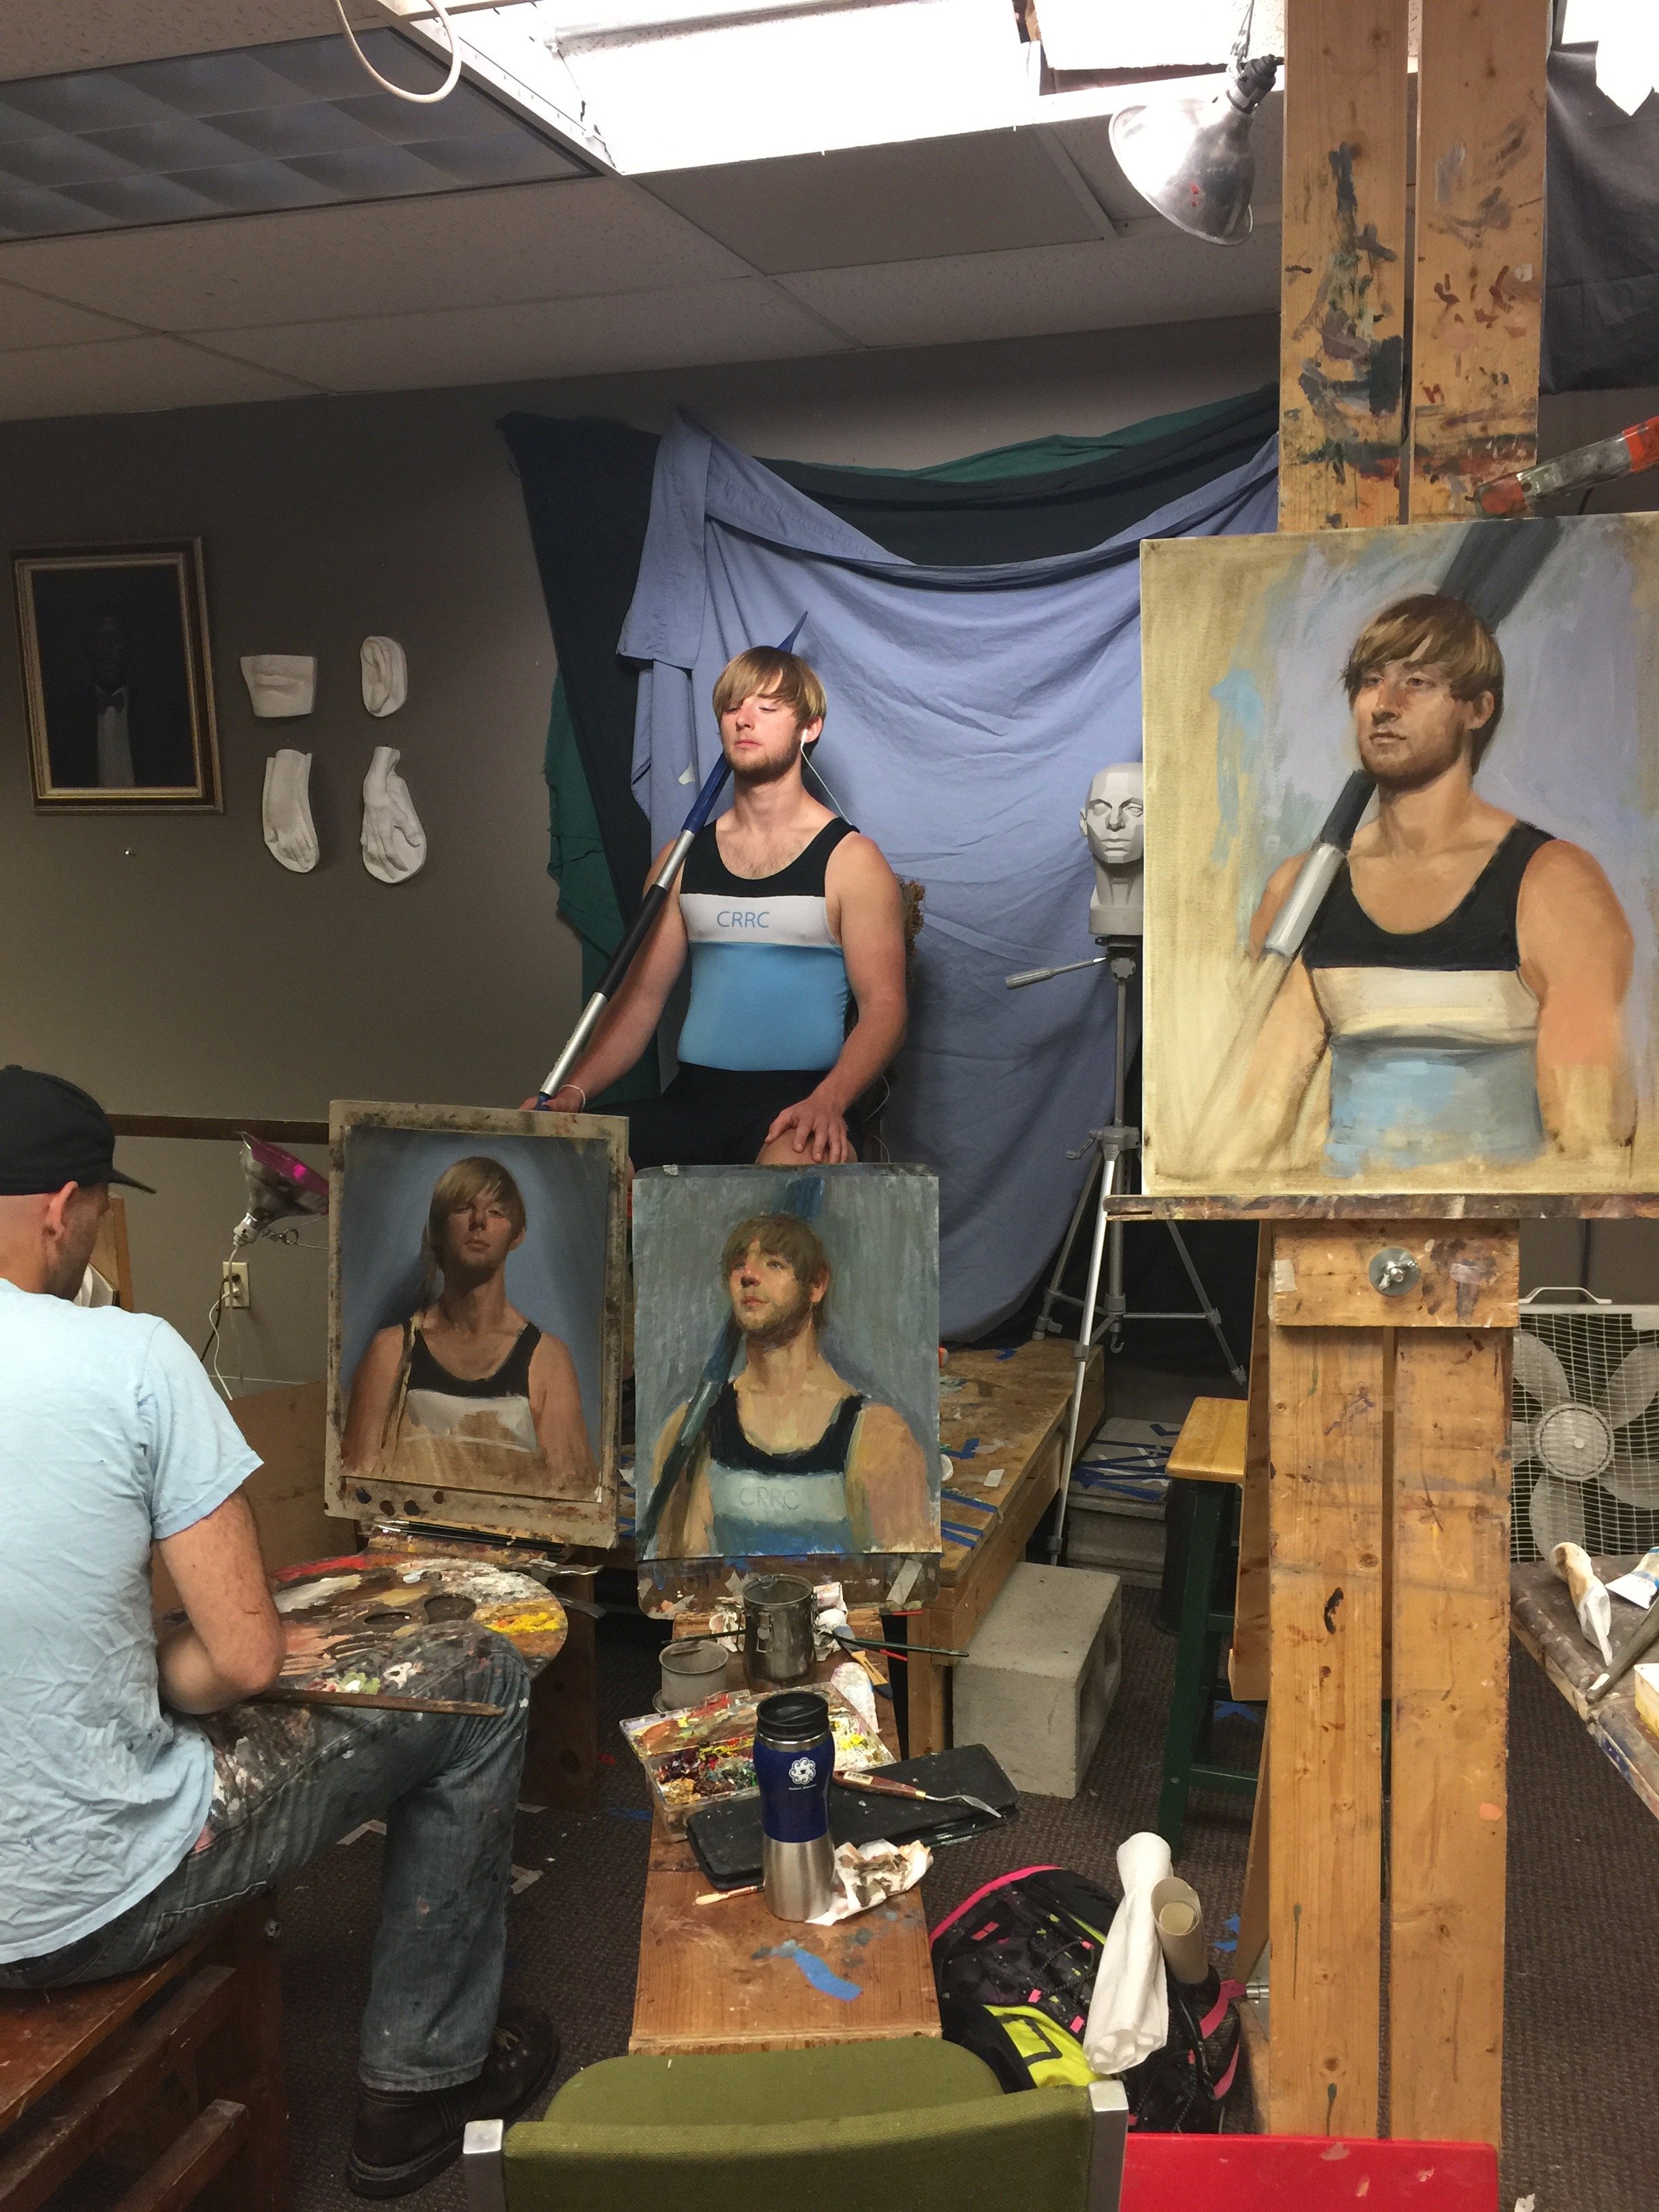 Painting the model, 2019